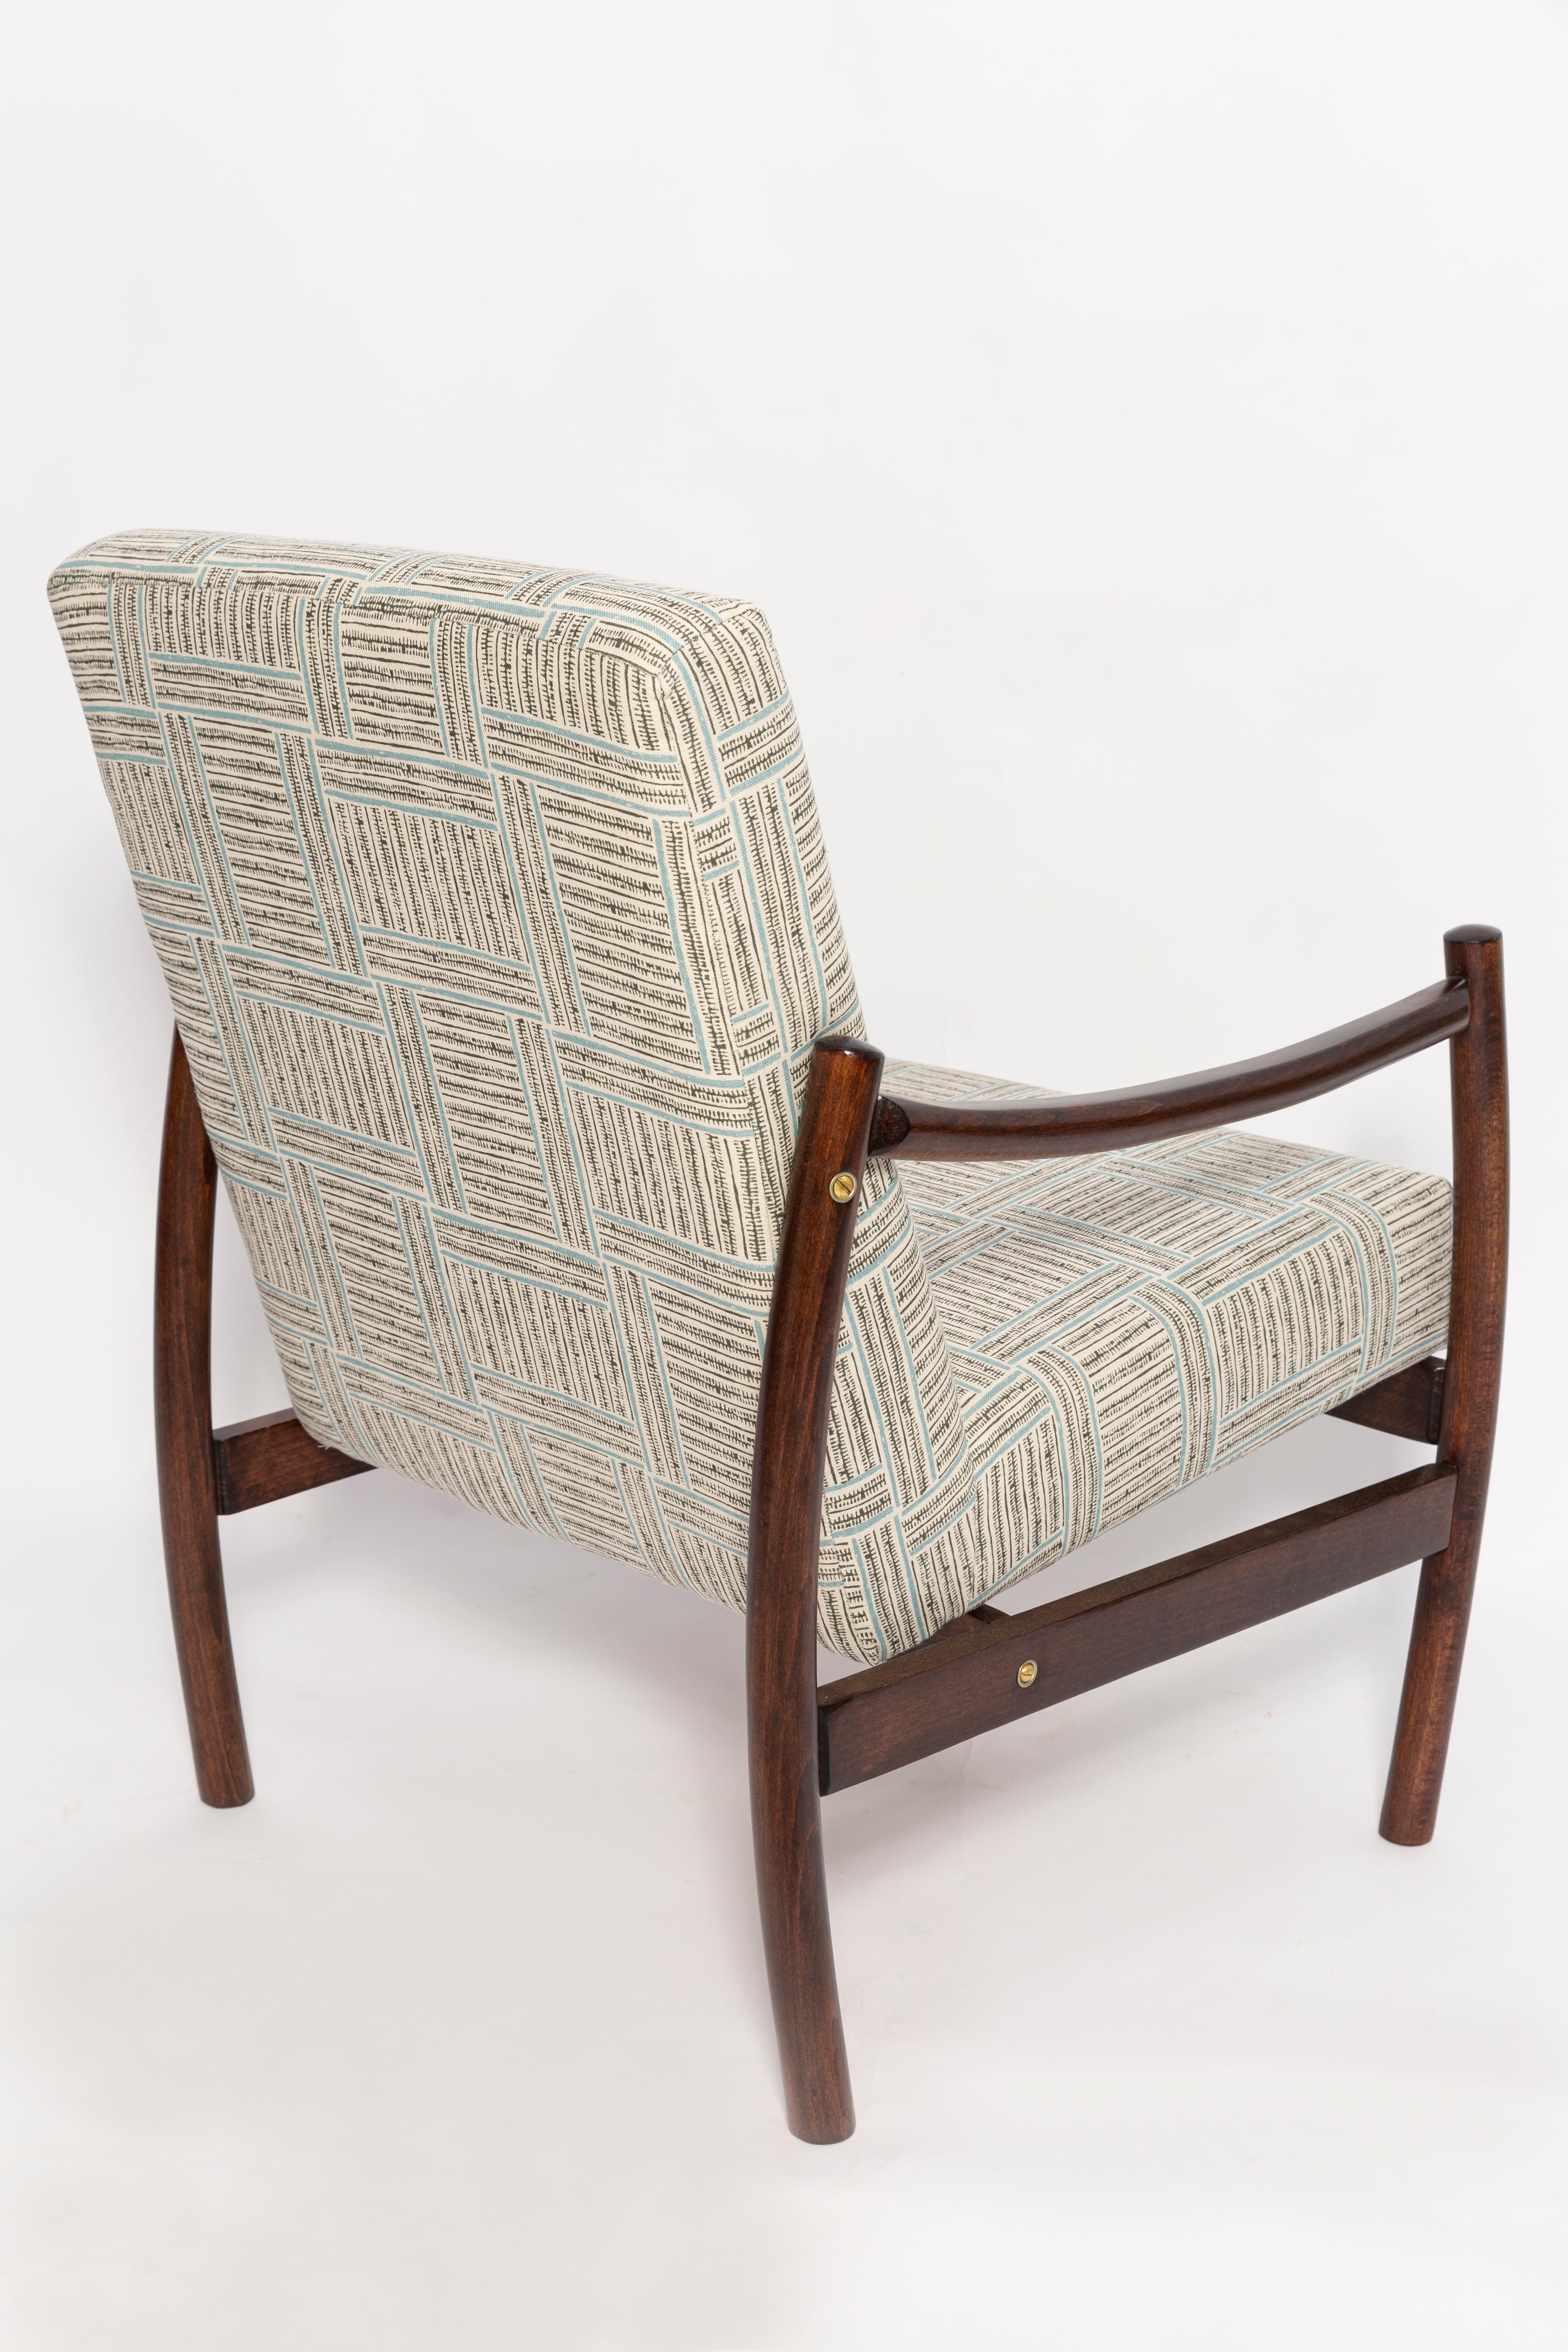 Mid-20th Century Vintage Armchair, Beige and Blue Linen, Europe, 1960s For Sale 1